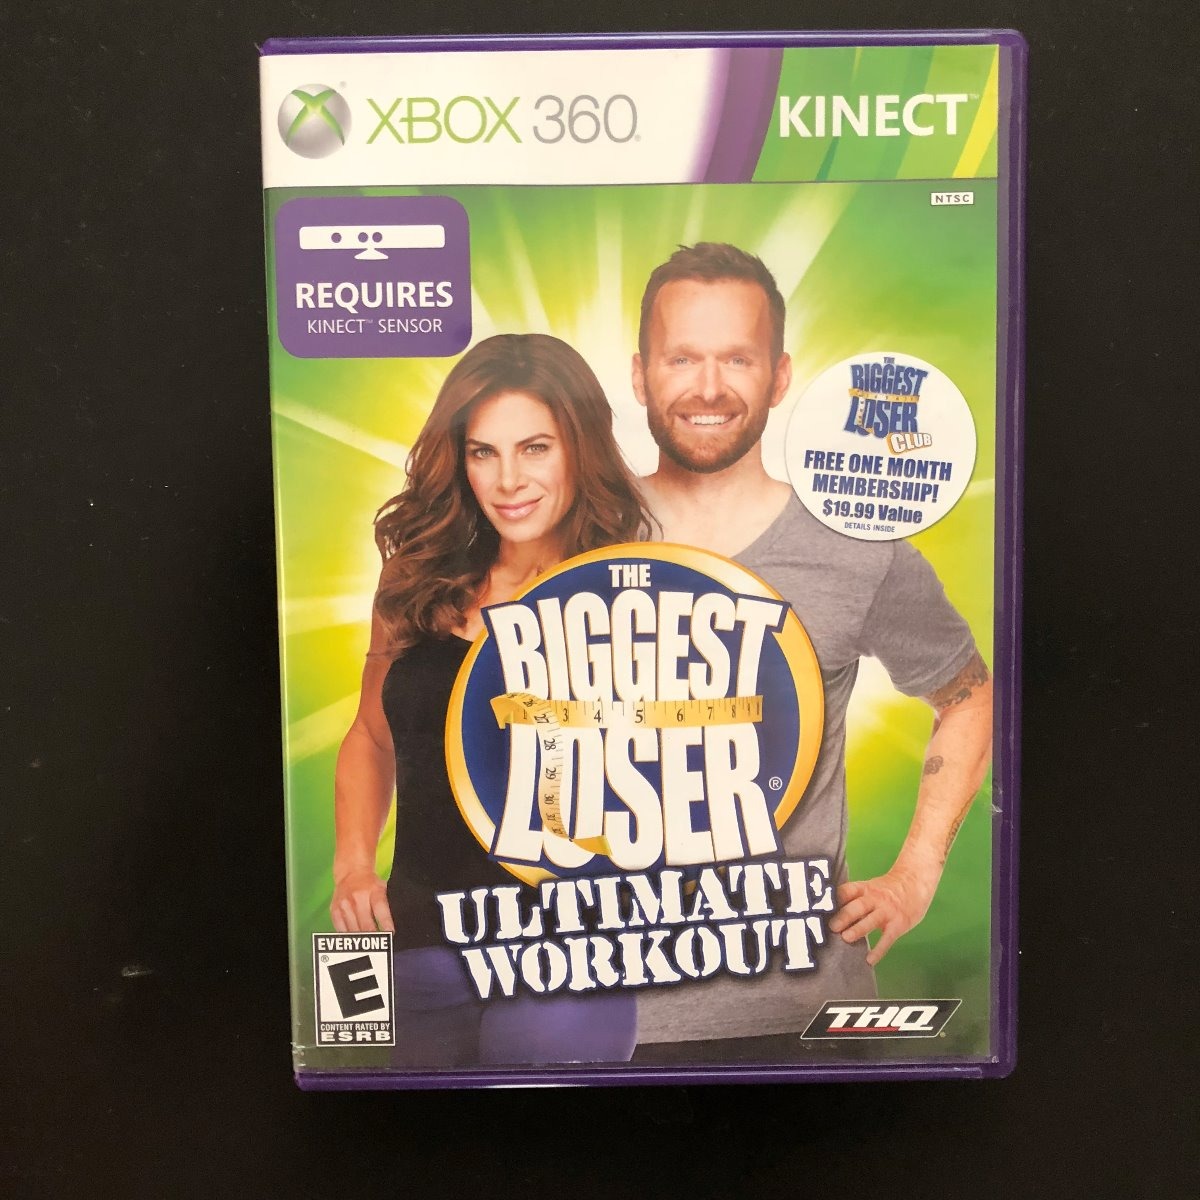 30 Minute The Biggest Loser Ultimate Workout Xbox One for Fat Body